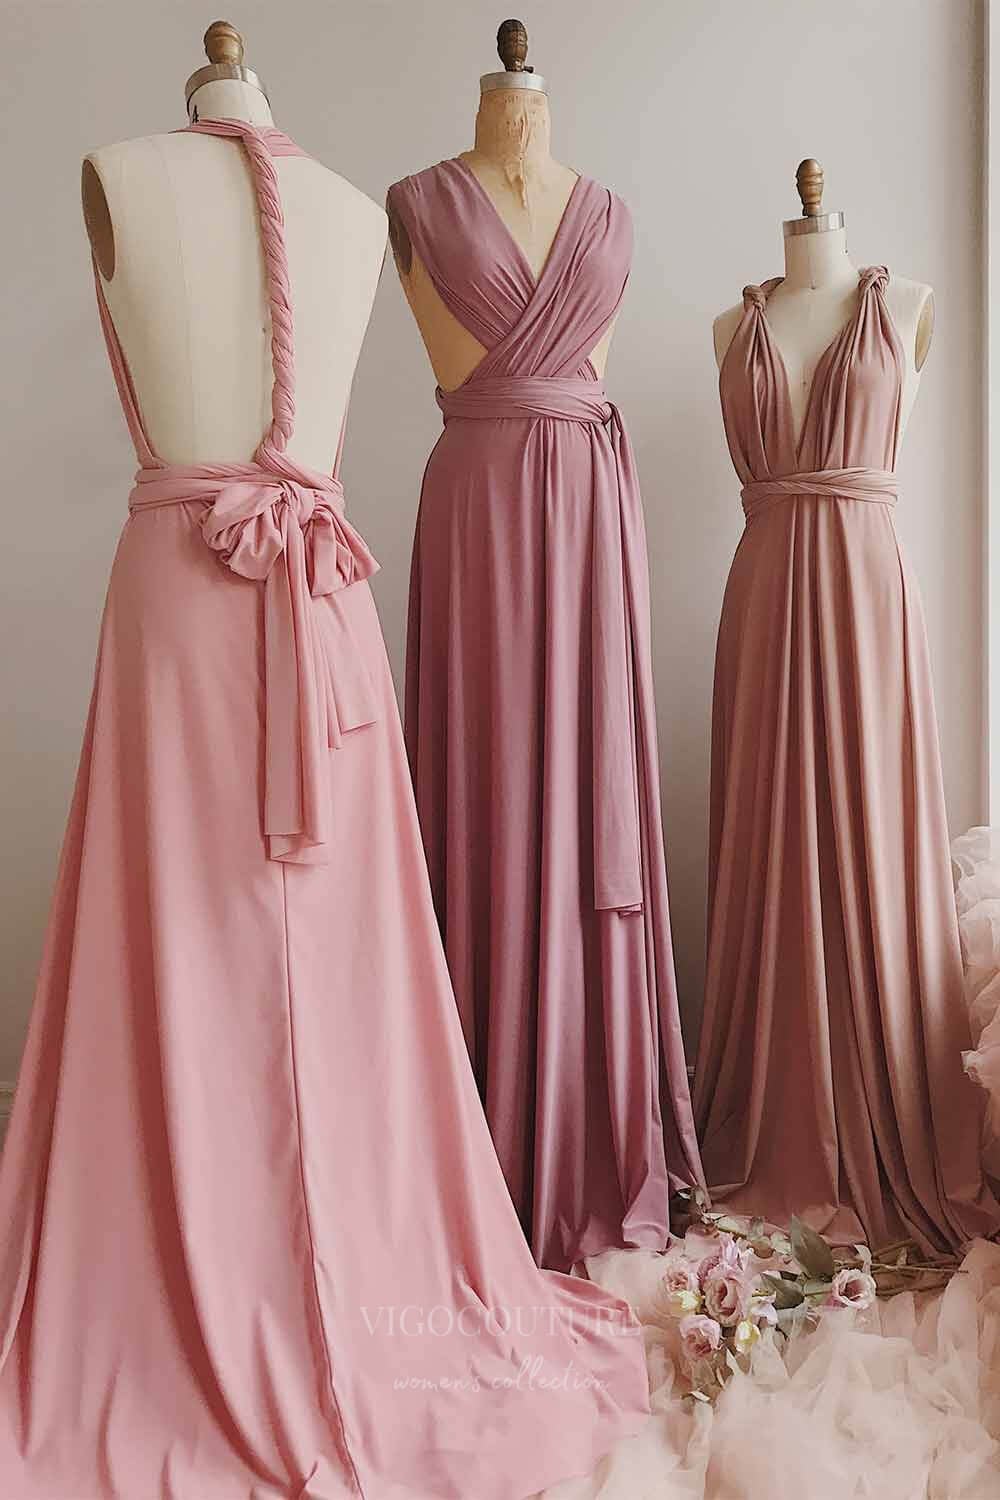 vigocouture-Convertible Bridesmaid Dress Stretchable Woven Dress Pleated Prom Dress Multiway Dress 20860-Prom Dresses-vigocouture-Pink-US2-